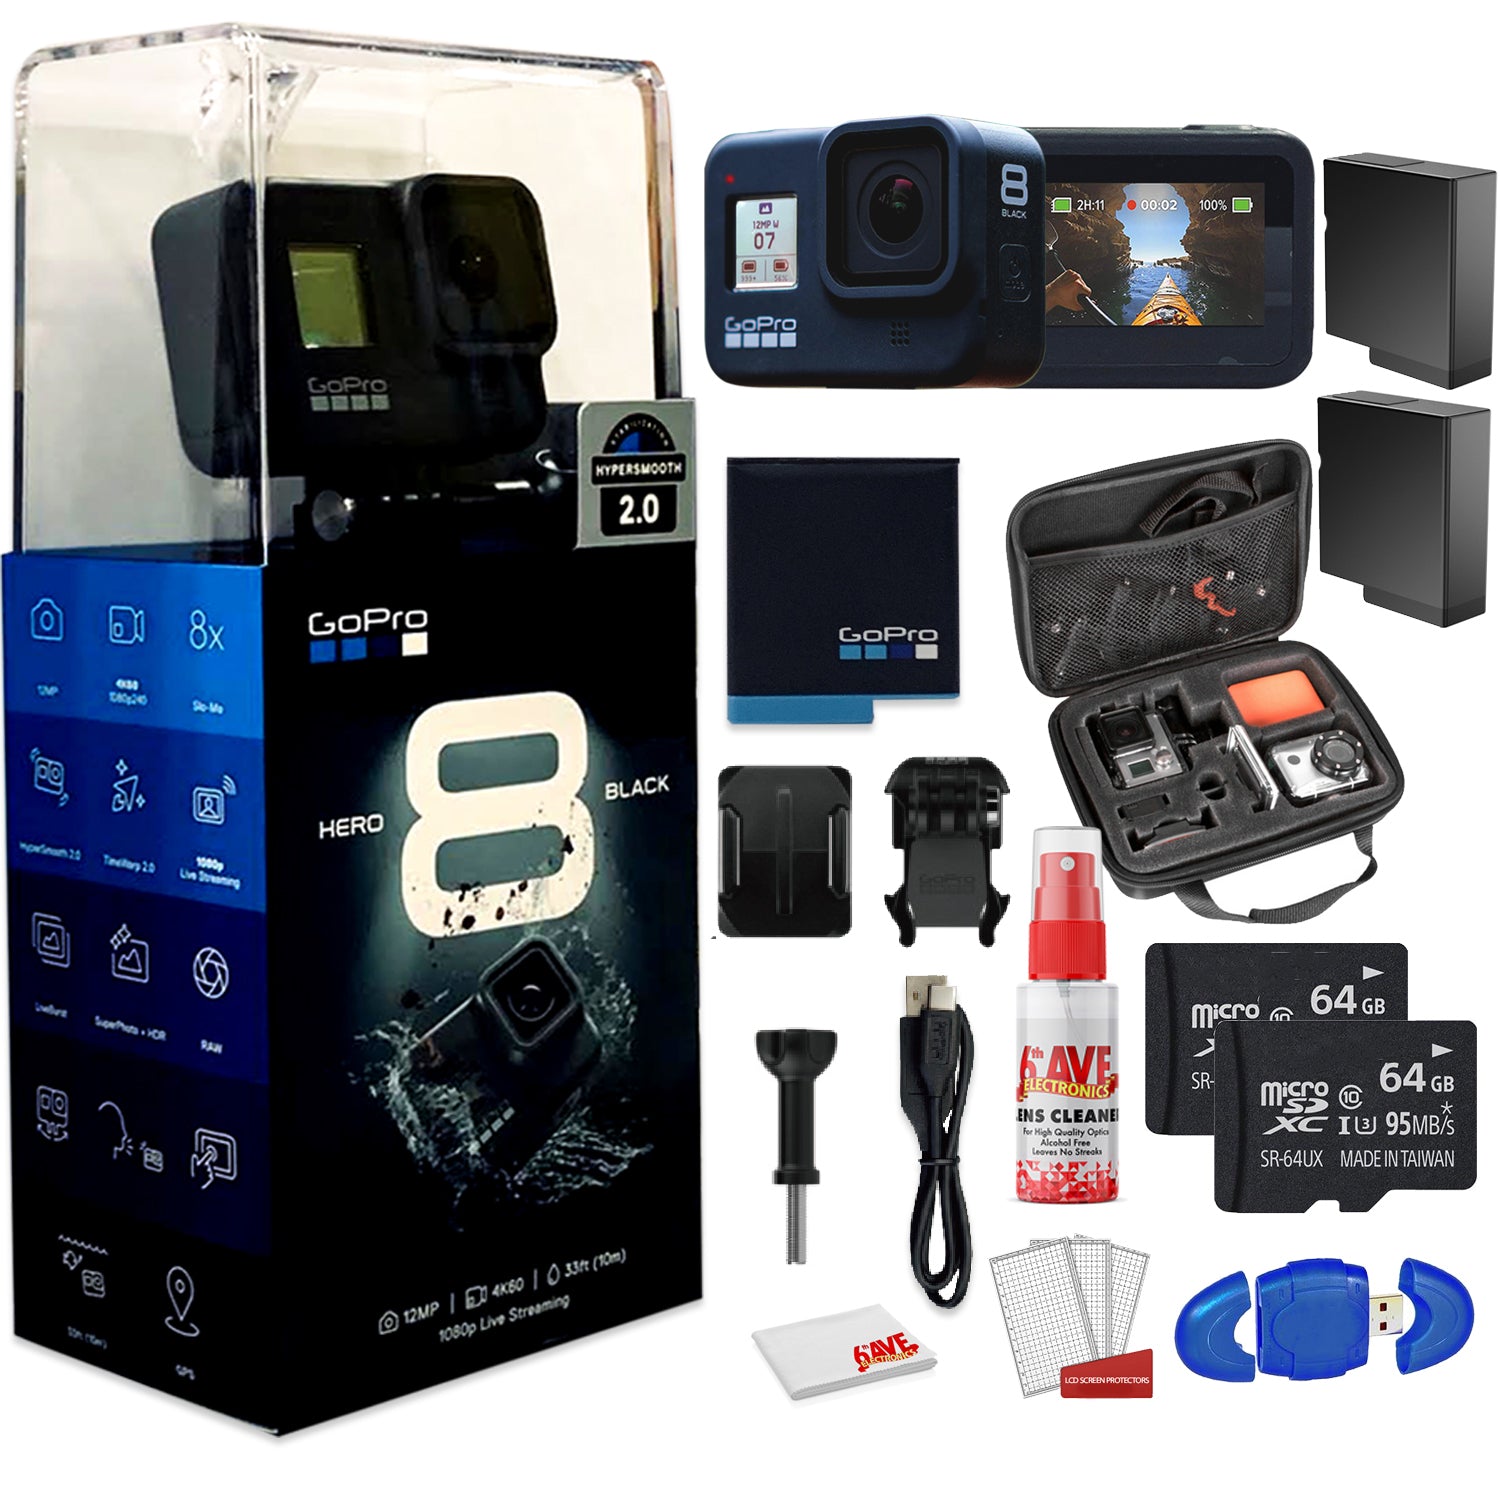 GoPro HERO8 Black Digital Action Camera - Waterproof - With Cleaning Set + Case + 2 x 64GB Memory Card and 2 x Extra Batteries